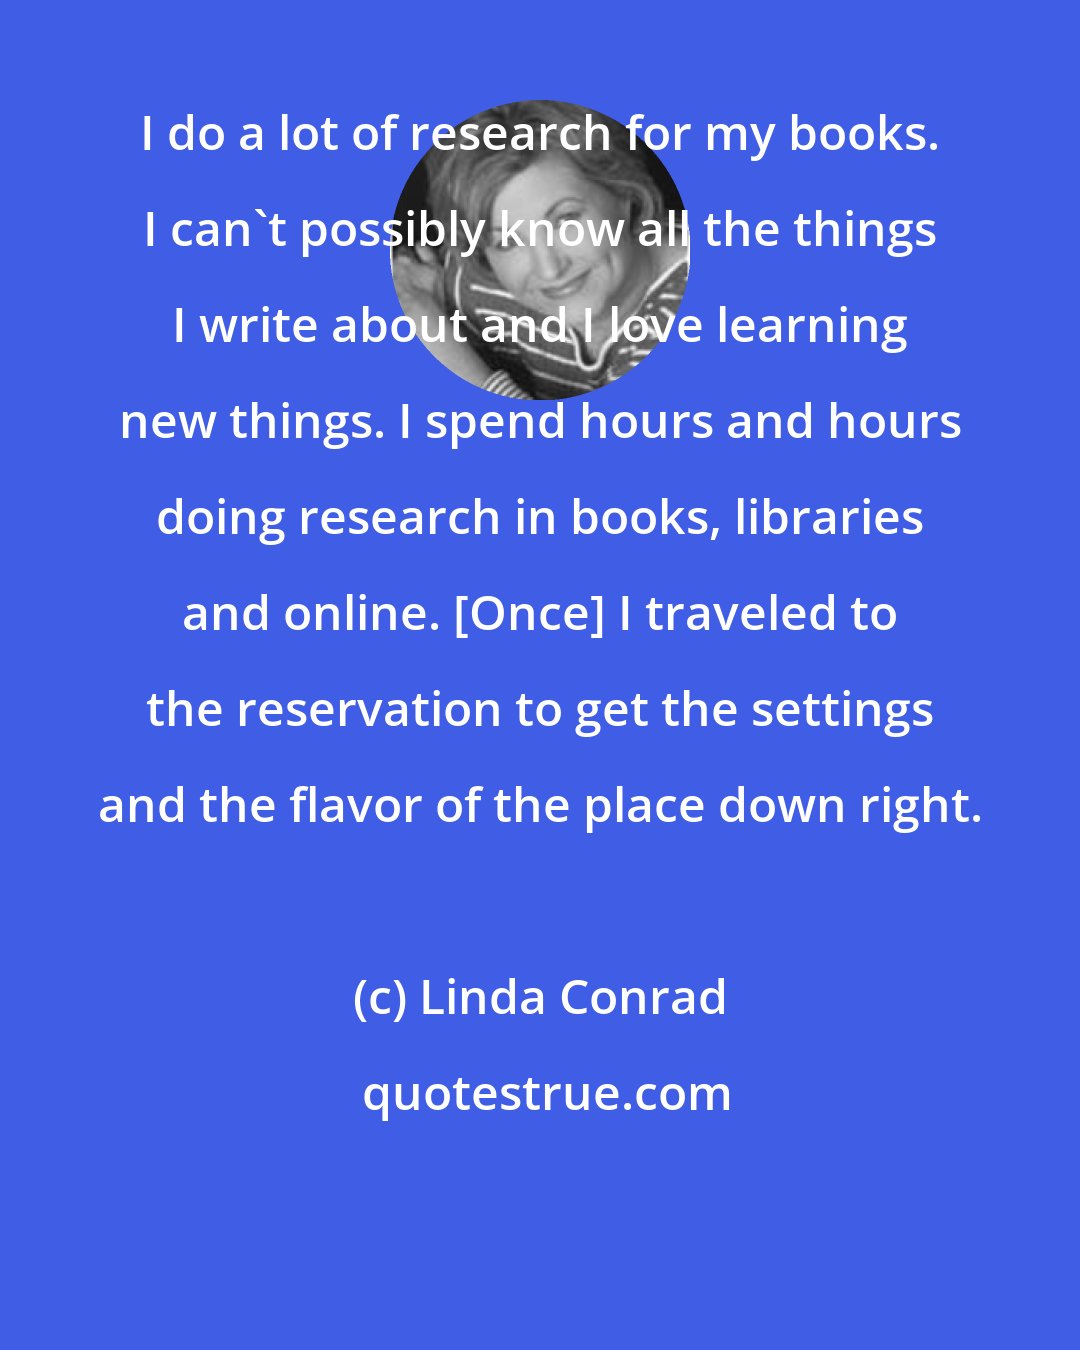 Linda Conrad: I do a lot of research for my books. I can't possibly know all the things I write about and I love learning new things. I spend hours and hours doing research in books, libraries and online. [Once] I traveled to the reservation to get the settings and the flavor of the place down right.